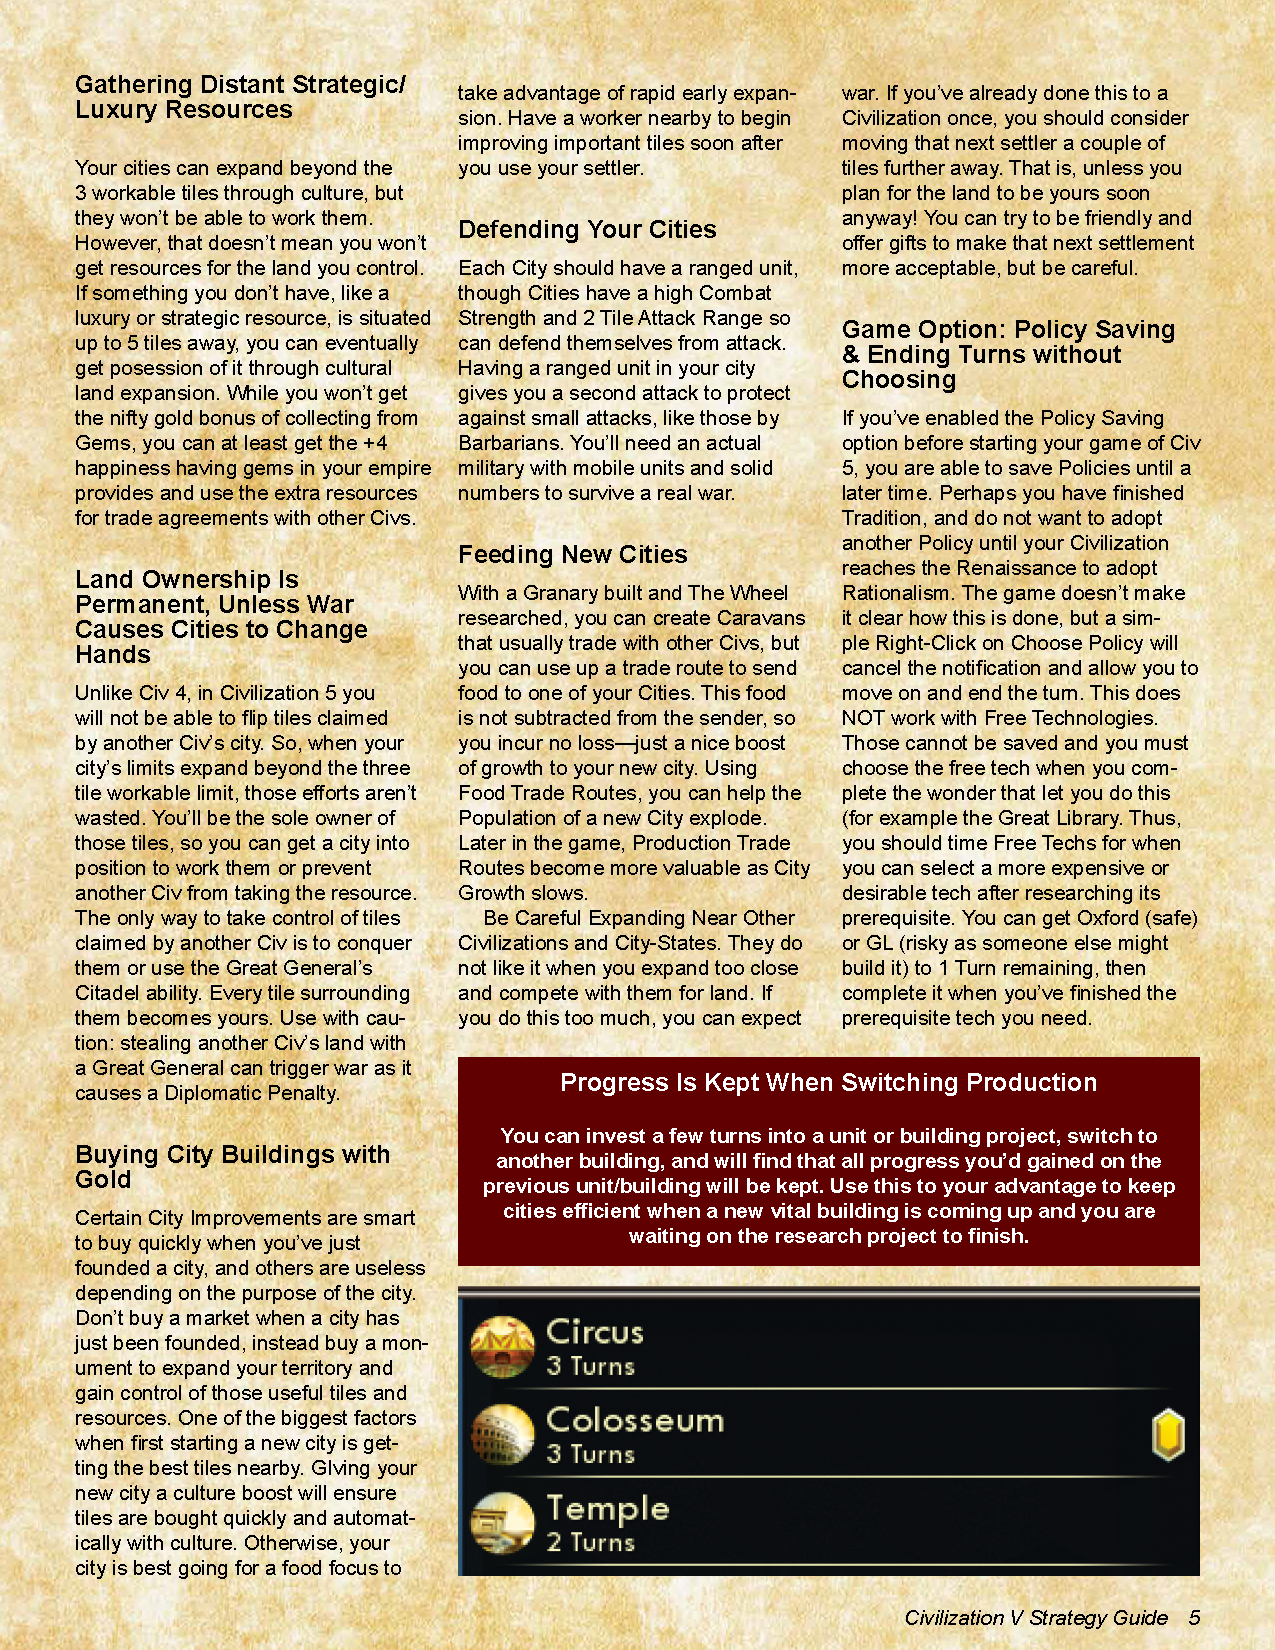 Civ 5 strategy guide (class exercise)